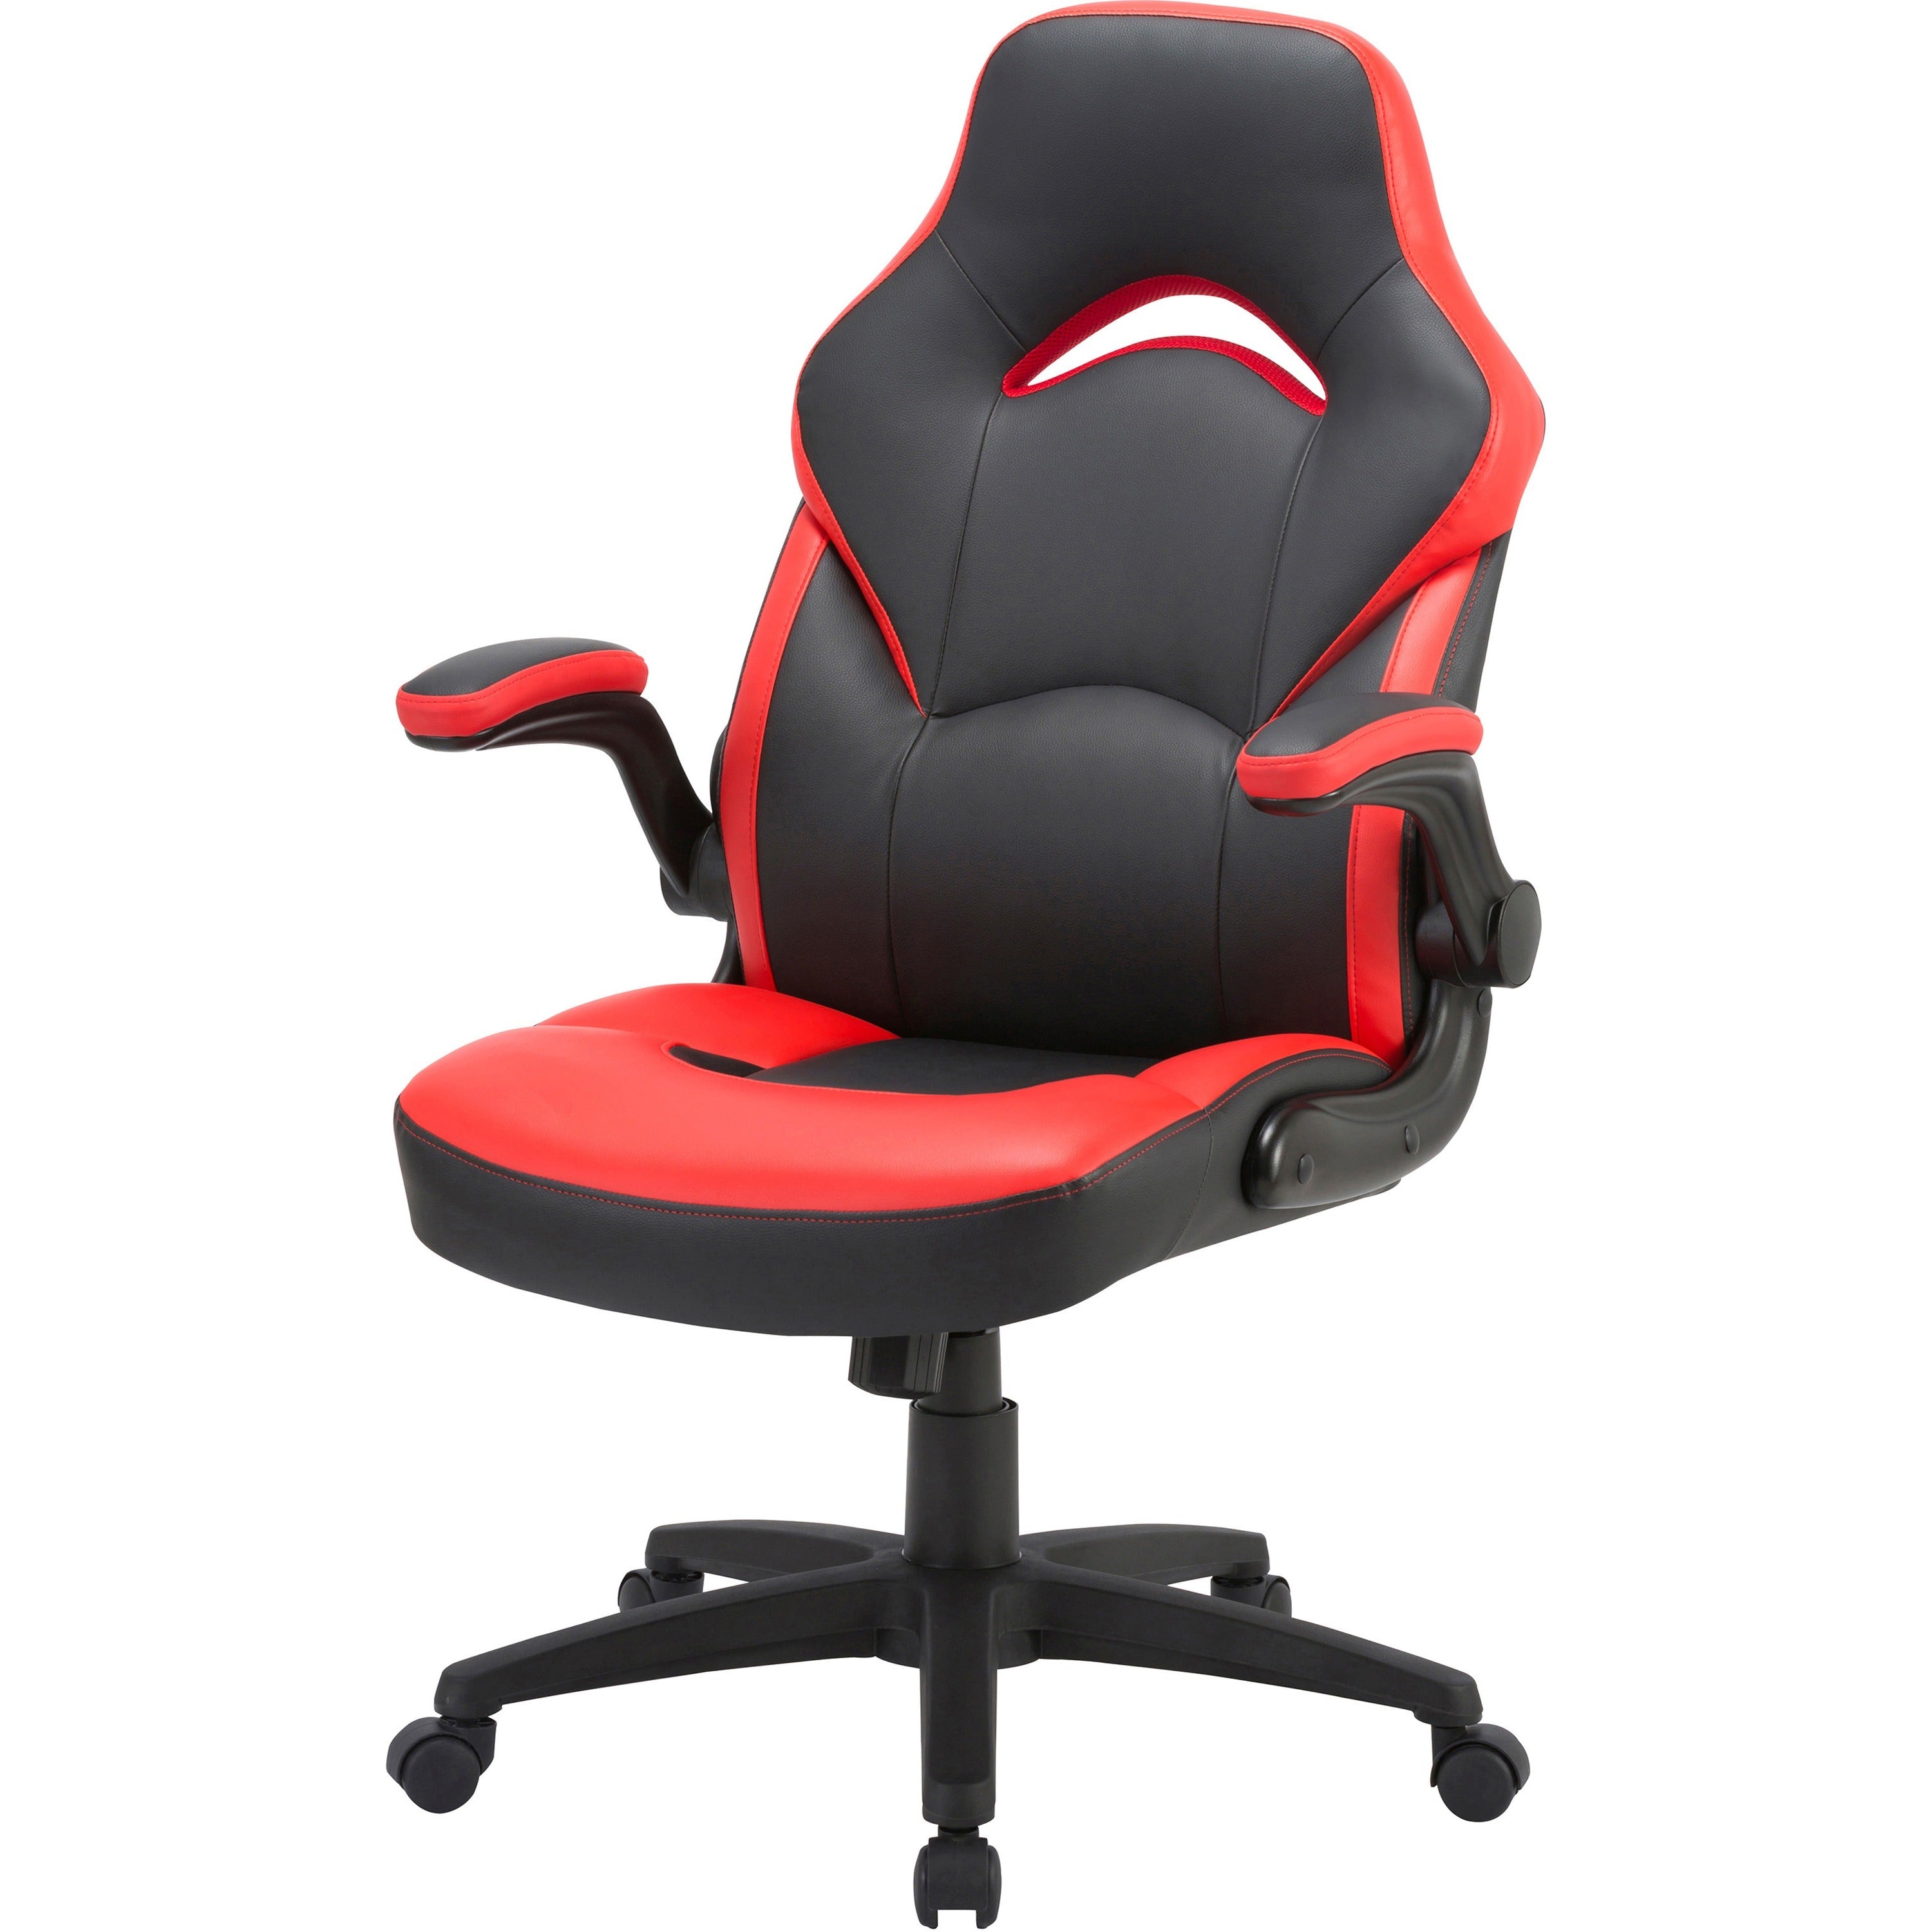 lorell-bucket-seat-high-back-gaming-chair-red-black-seat-red-black-back-5-star-base-28-length-x-205-width-x-475-height_llr84387 - 4